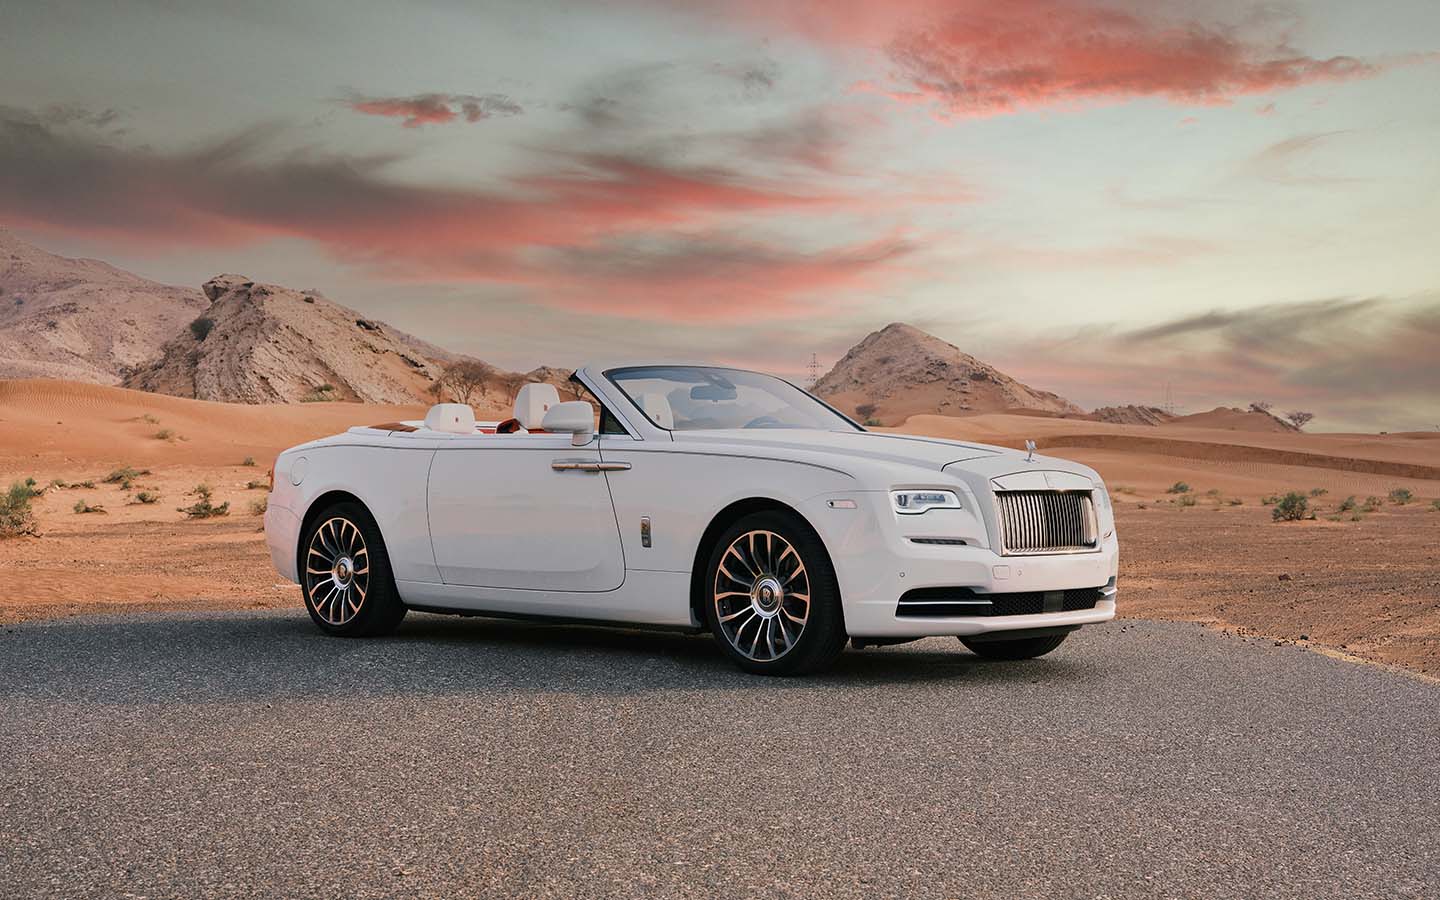 only rolls-royce owners can gain access to the app